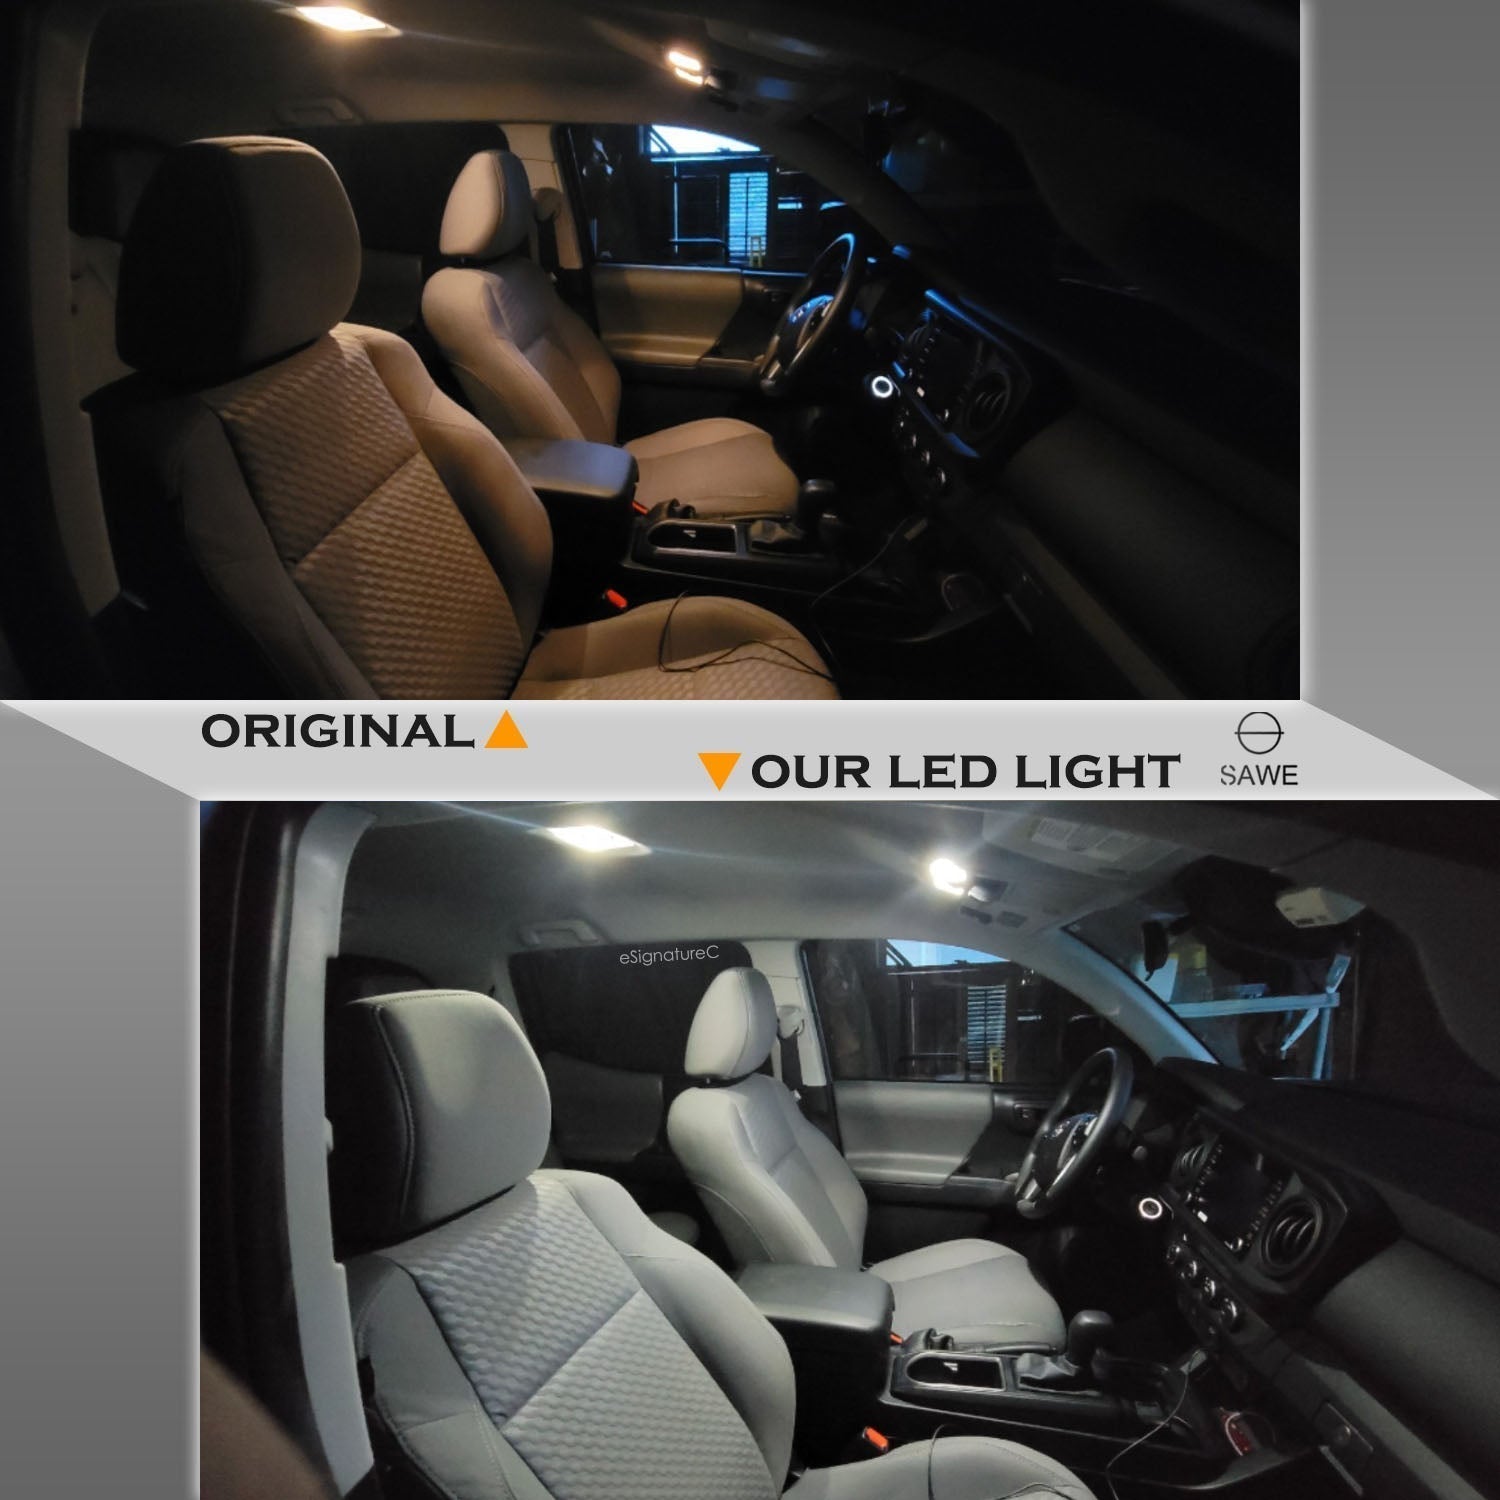 For Cadillac Escalade Interior LED Lights - Dome & Map Light Bulbs Package Kit for 2002 - 2006 - White